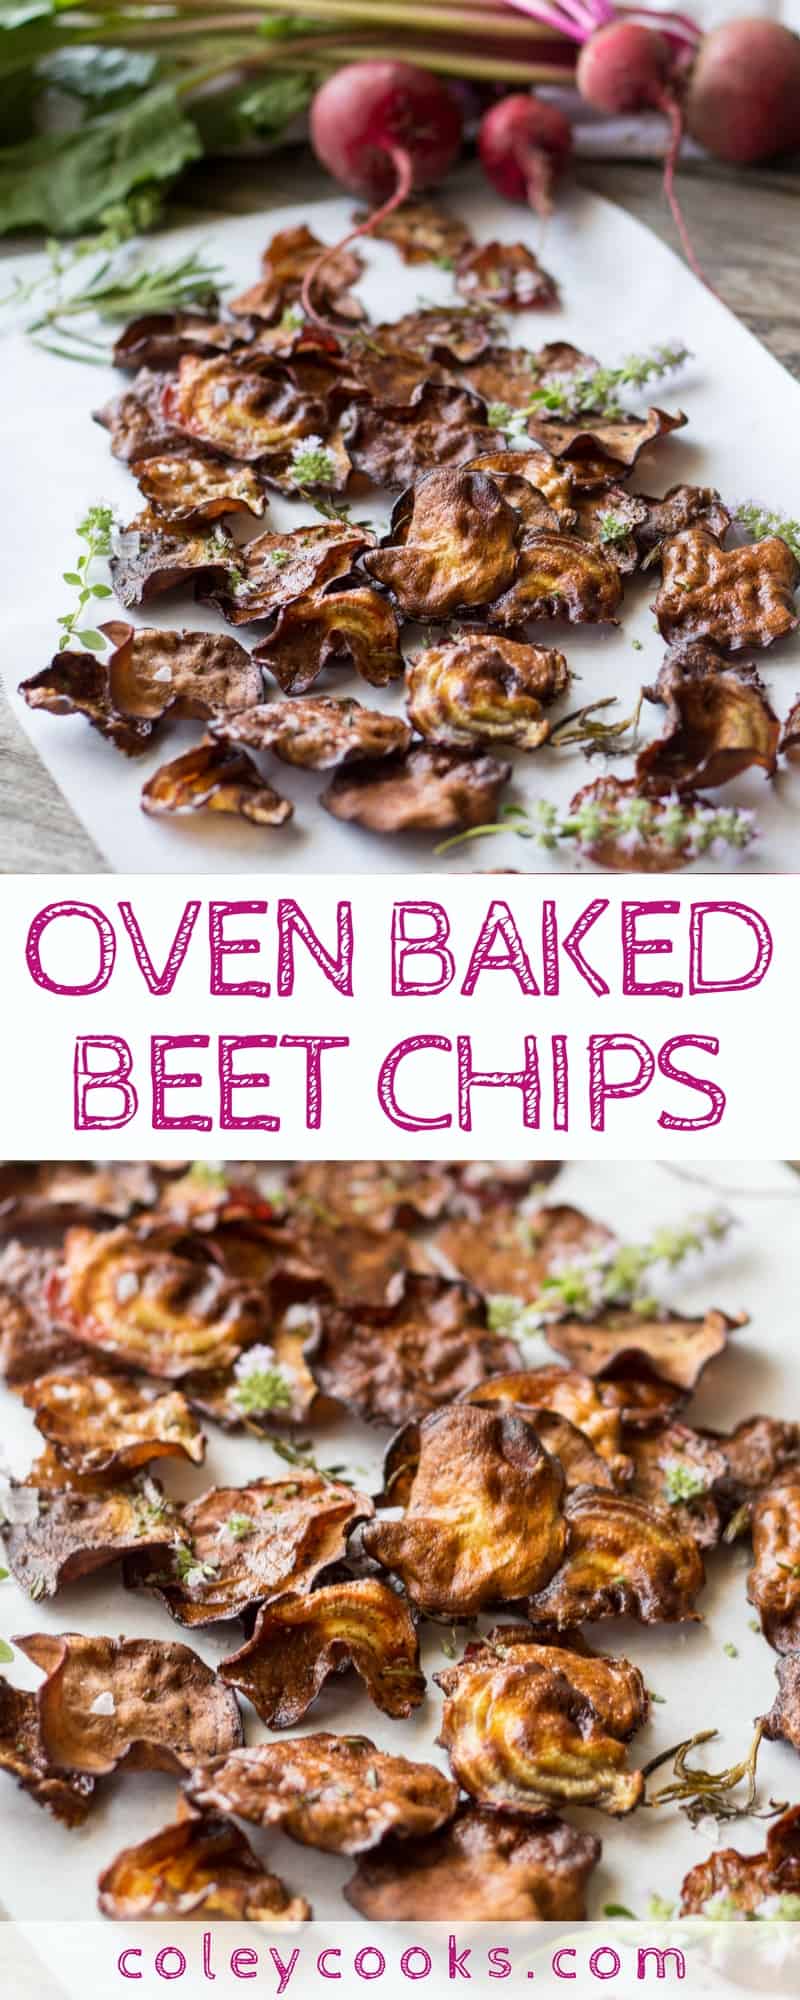 OVEN BAKED BEET CHIPS | This EASY recipe for beet chips are light and crisp, salty and satisfying. They're made in the oven so they're healthy too! Paleo, vegan, gluten free. | ColeyCooks.com